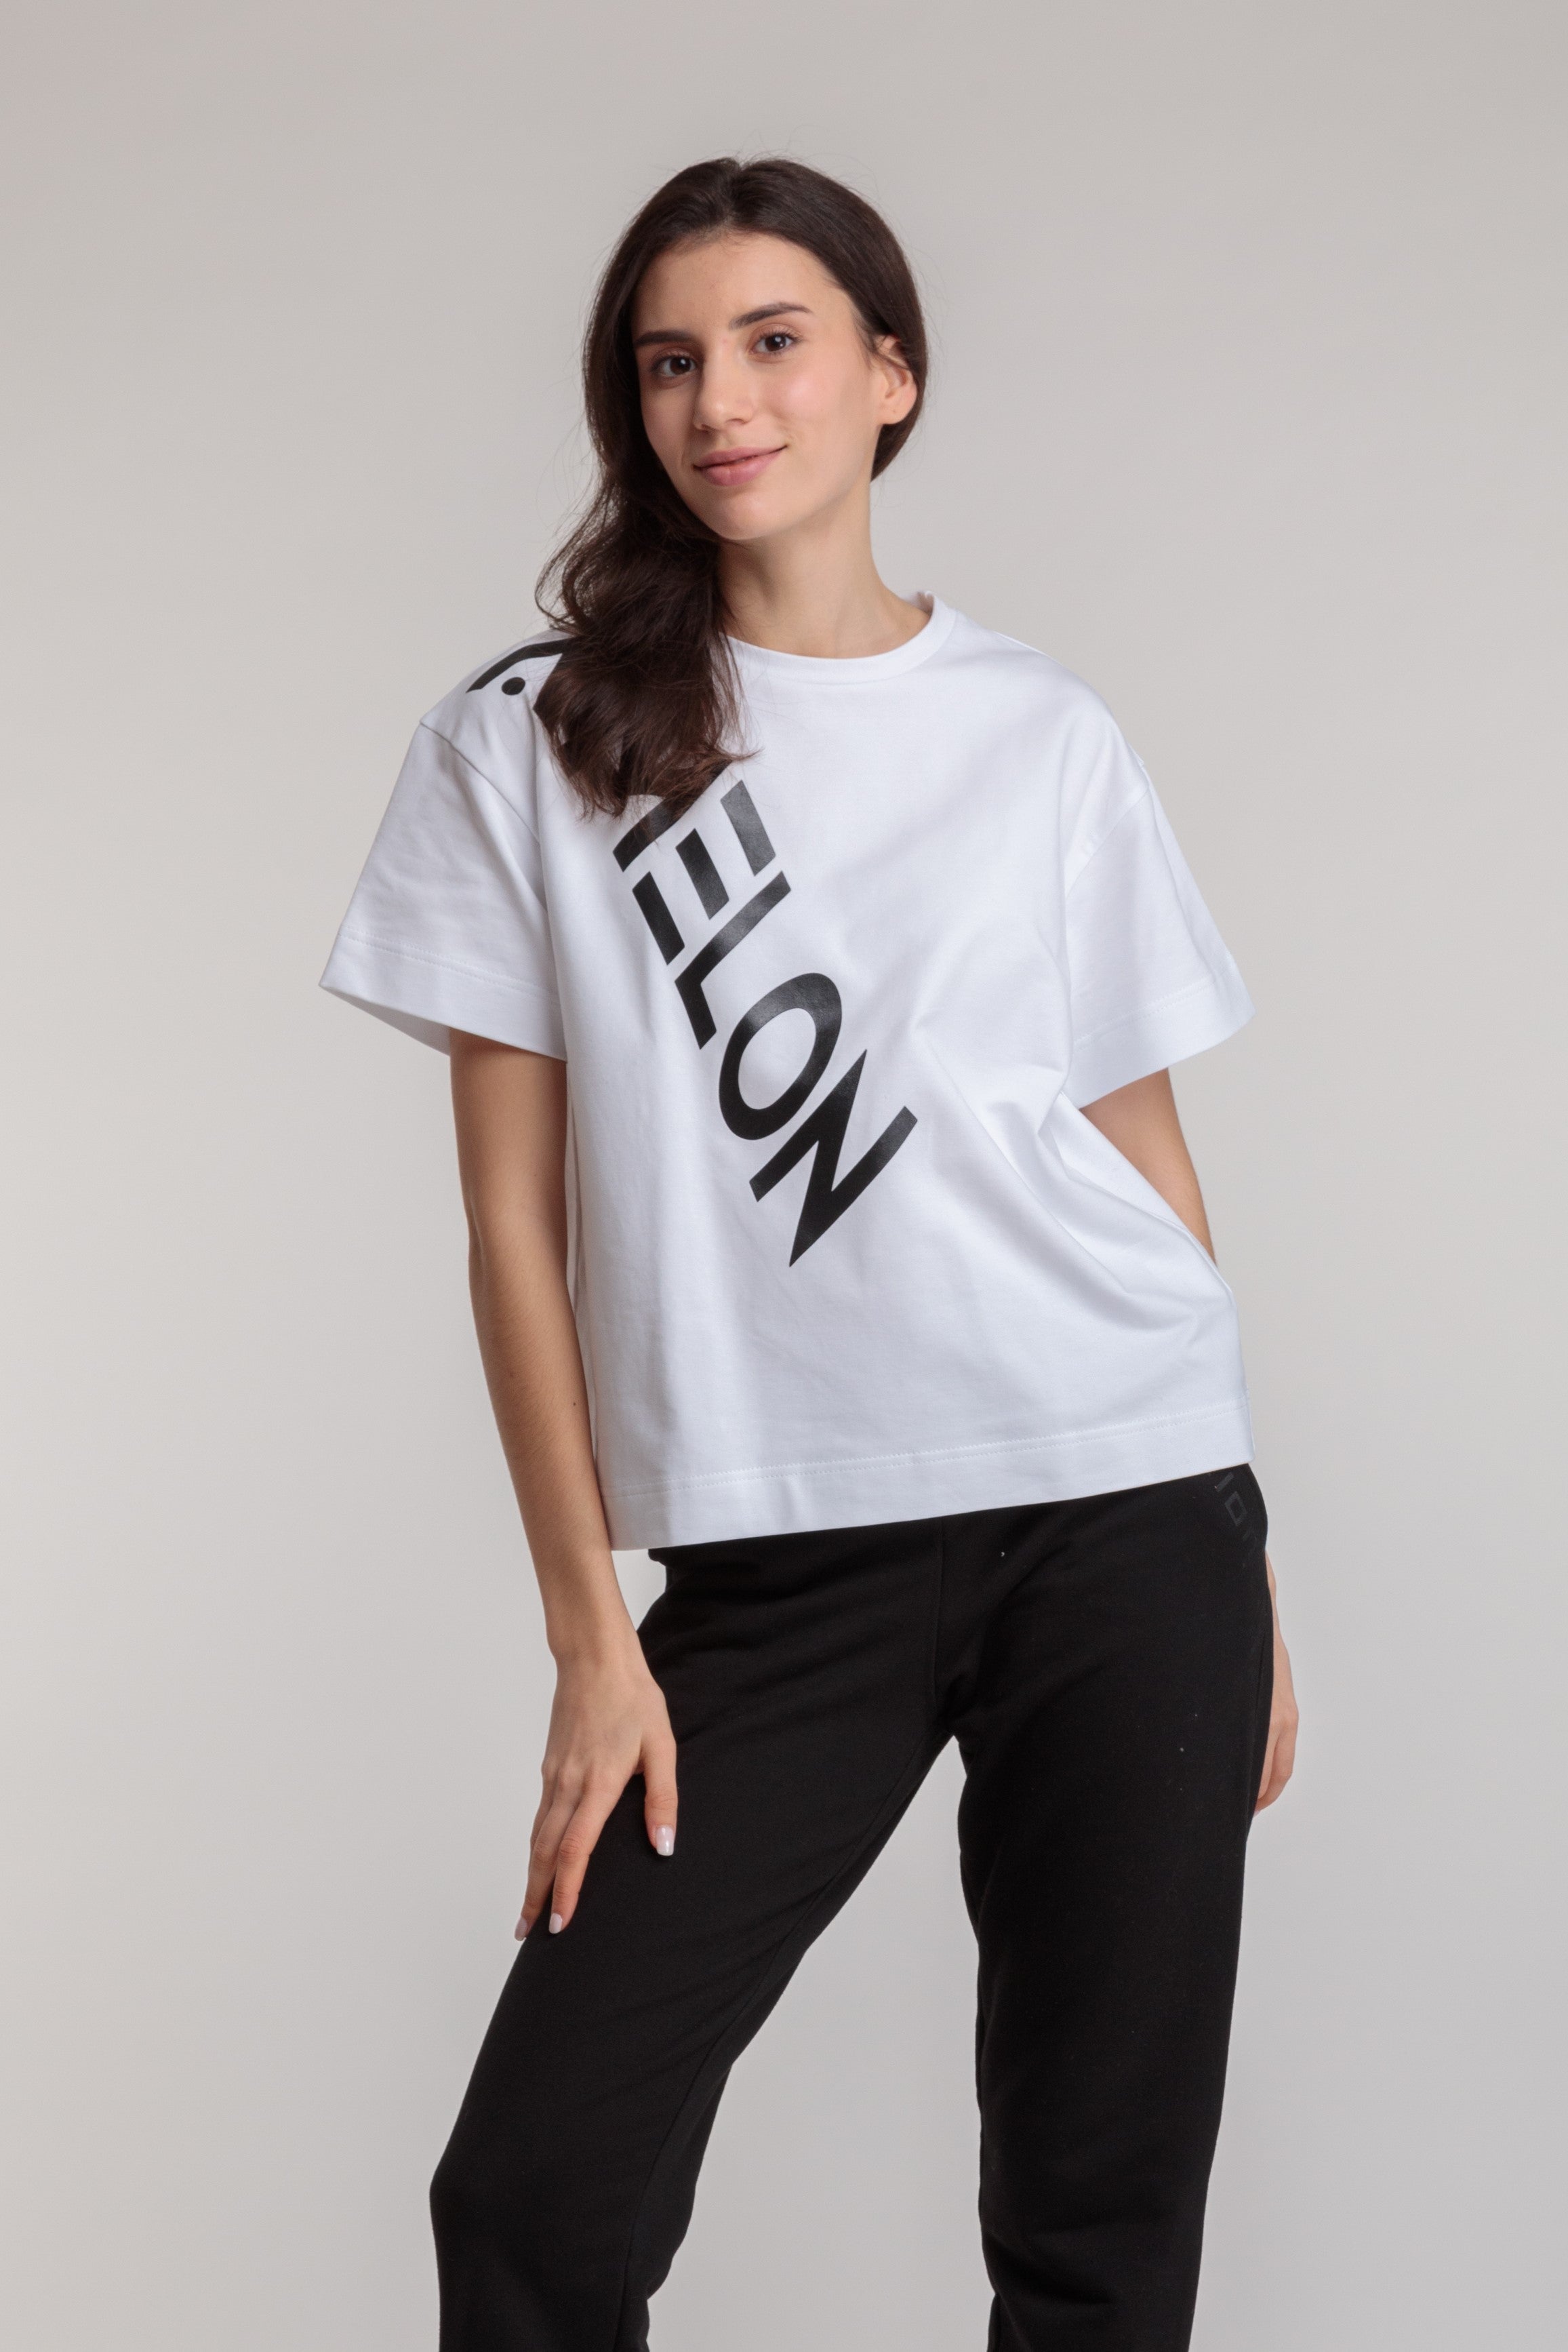 Women's straight white t-shirt with a large black lettering